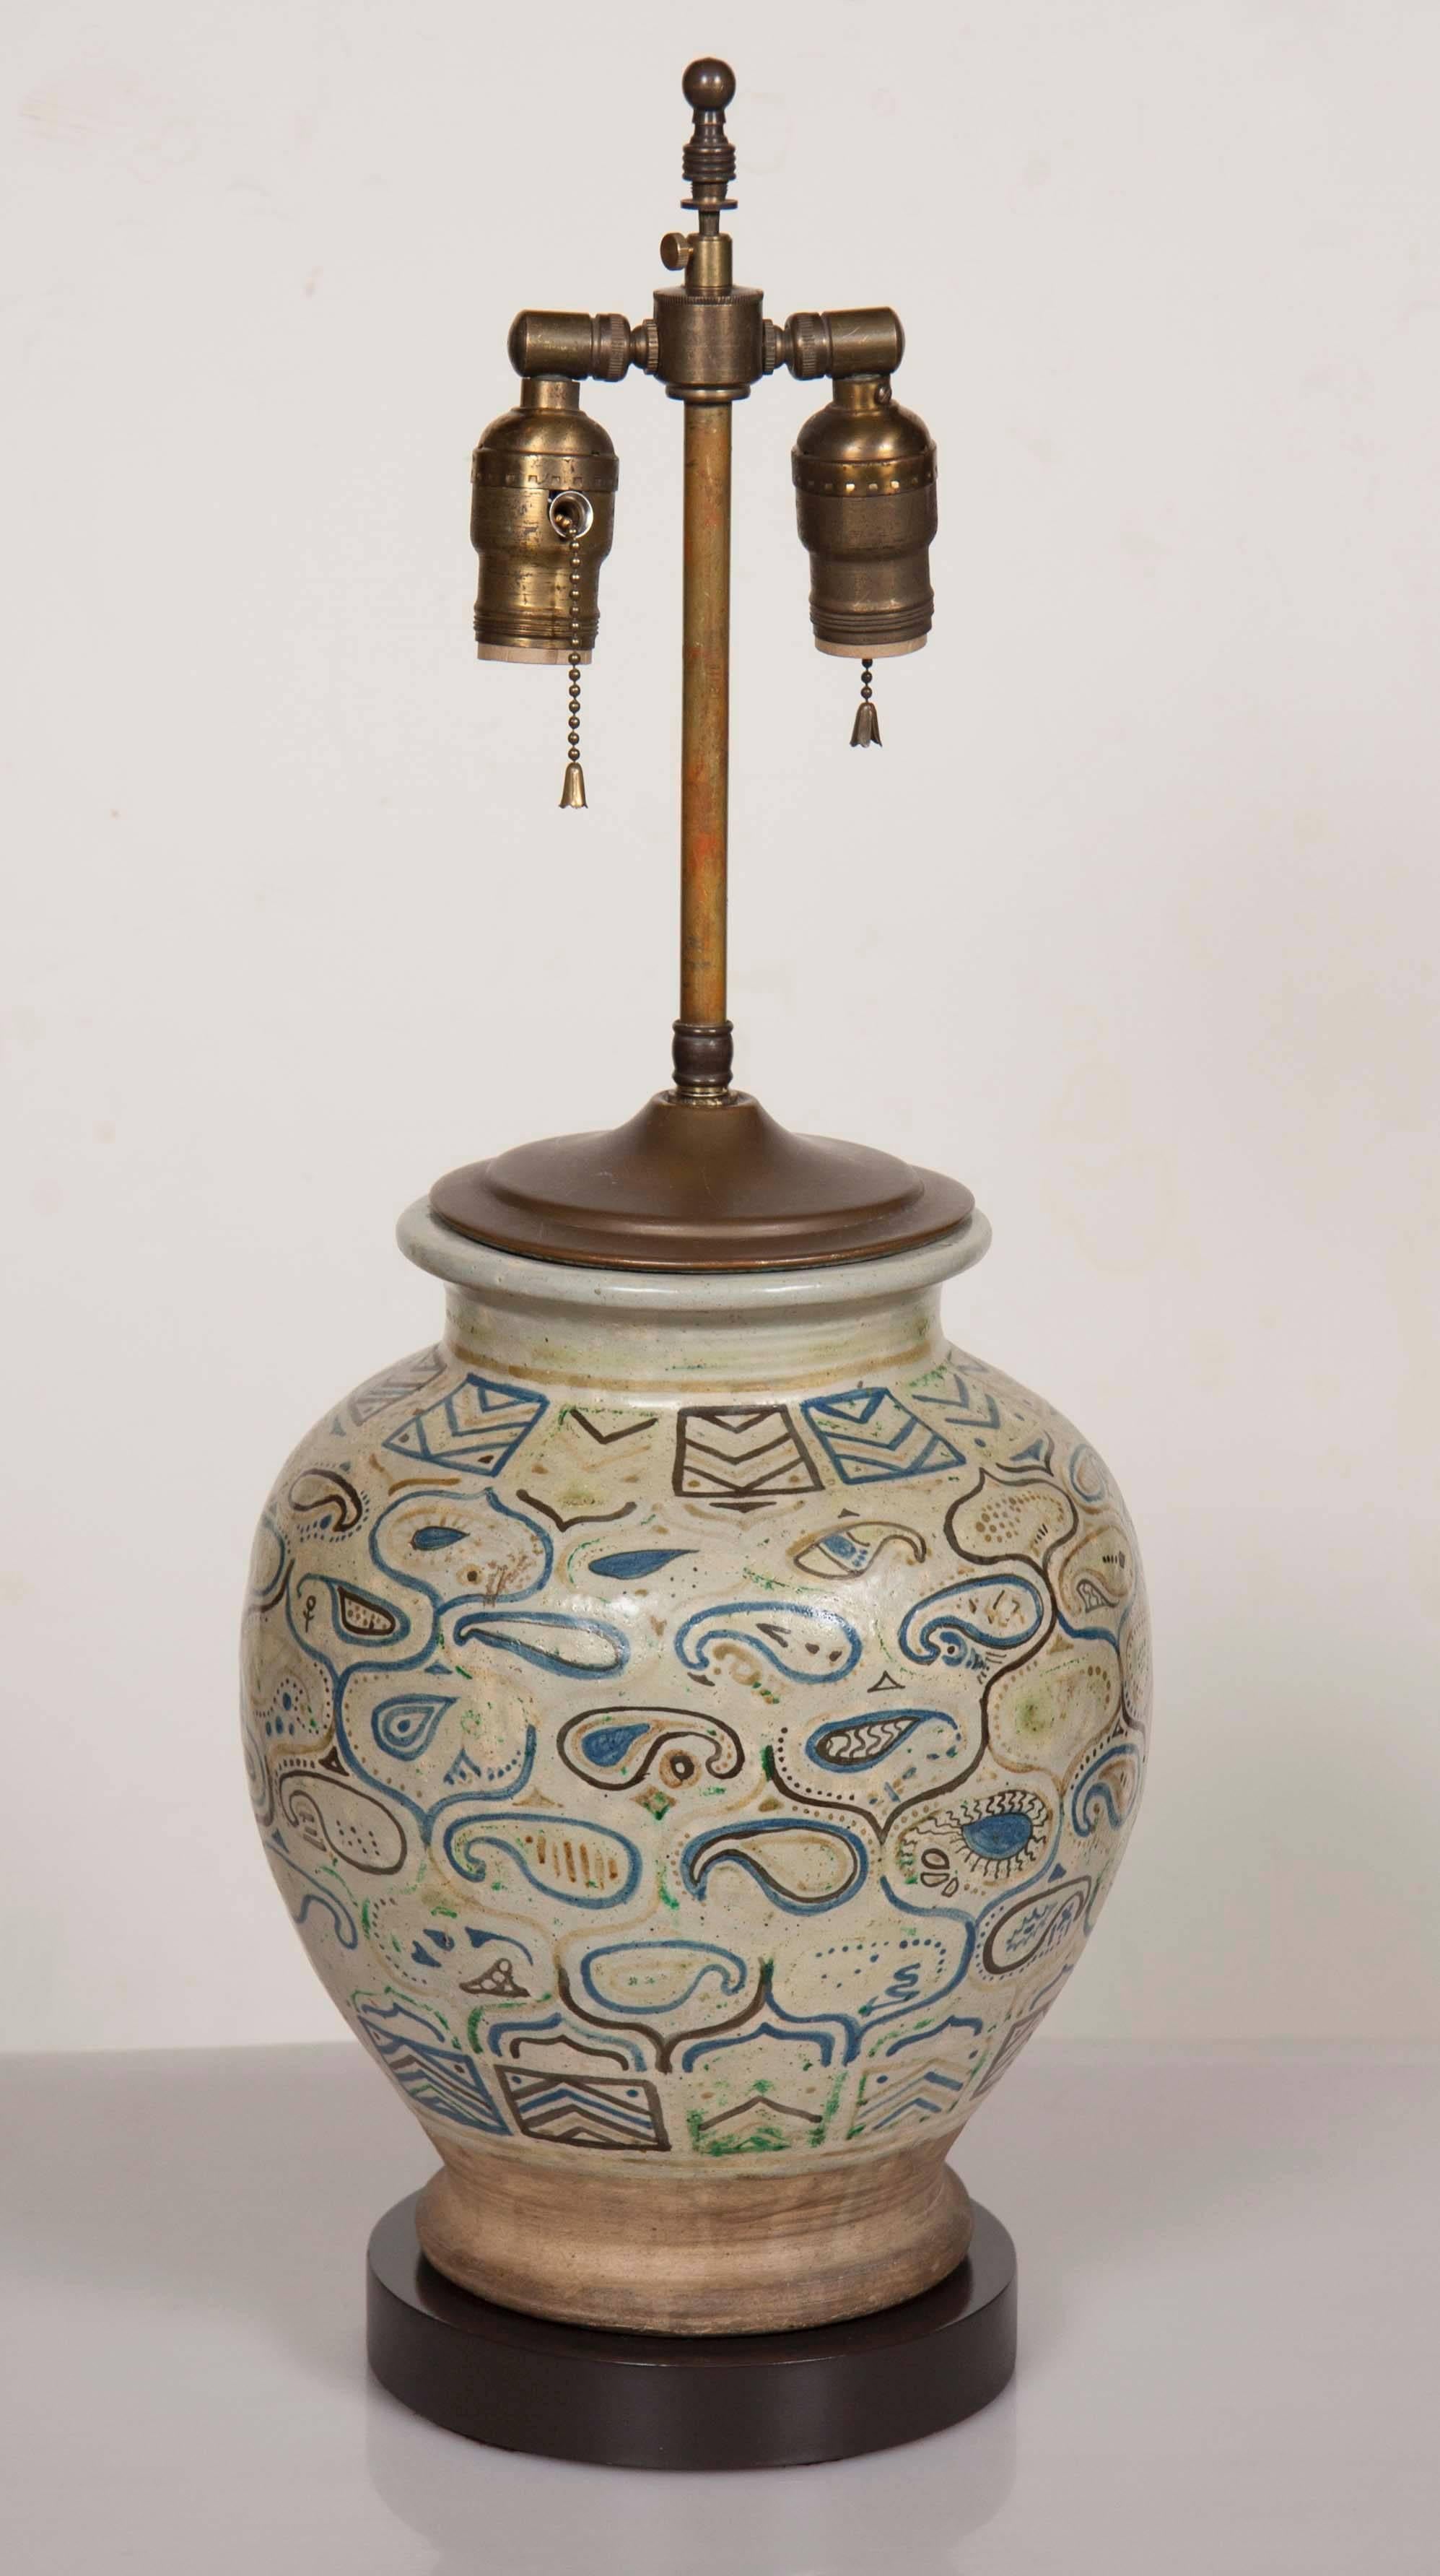 A middle Eastern ceramic or pottery jar now electrified as a table lamp. Height to the top of the jar is 13 inches. Overall height is 24 inches.